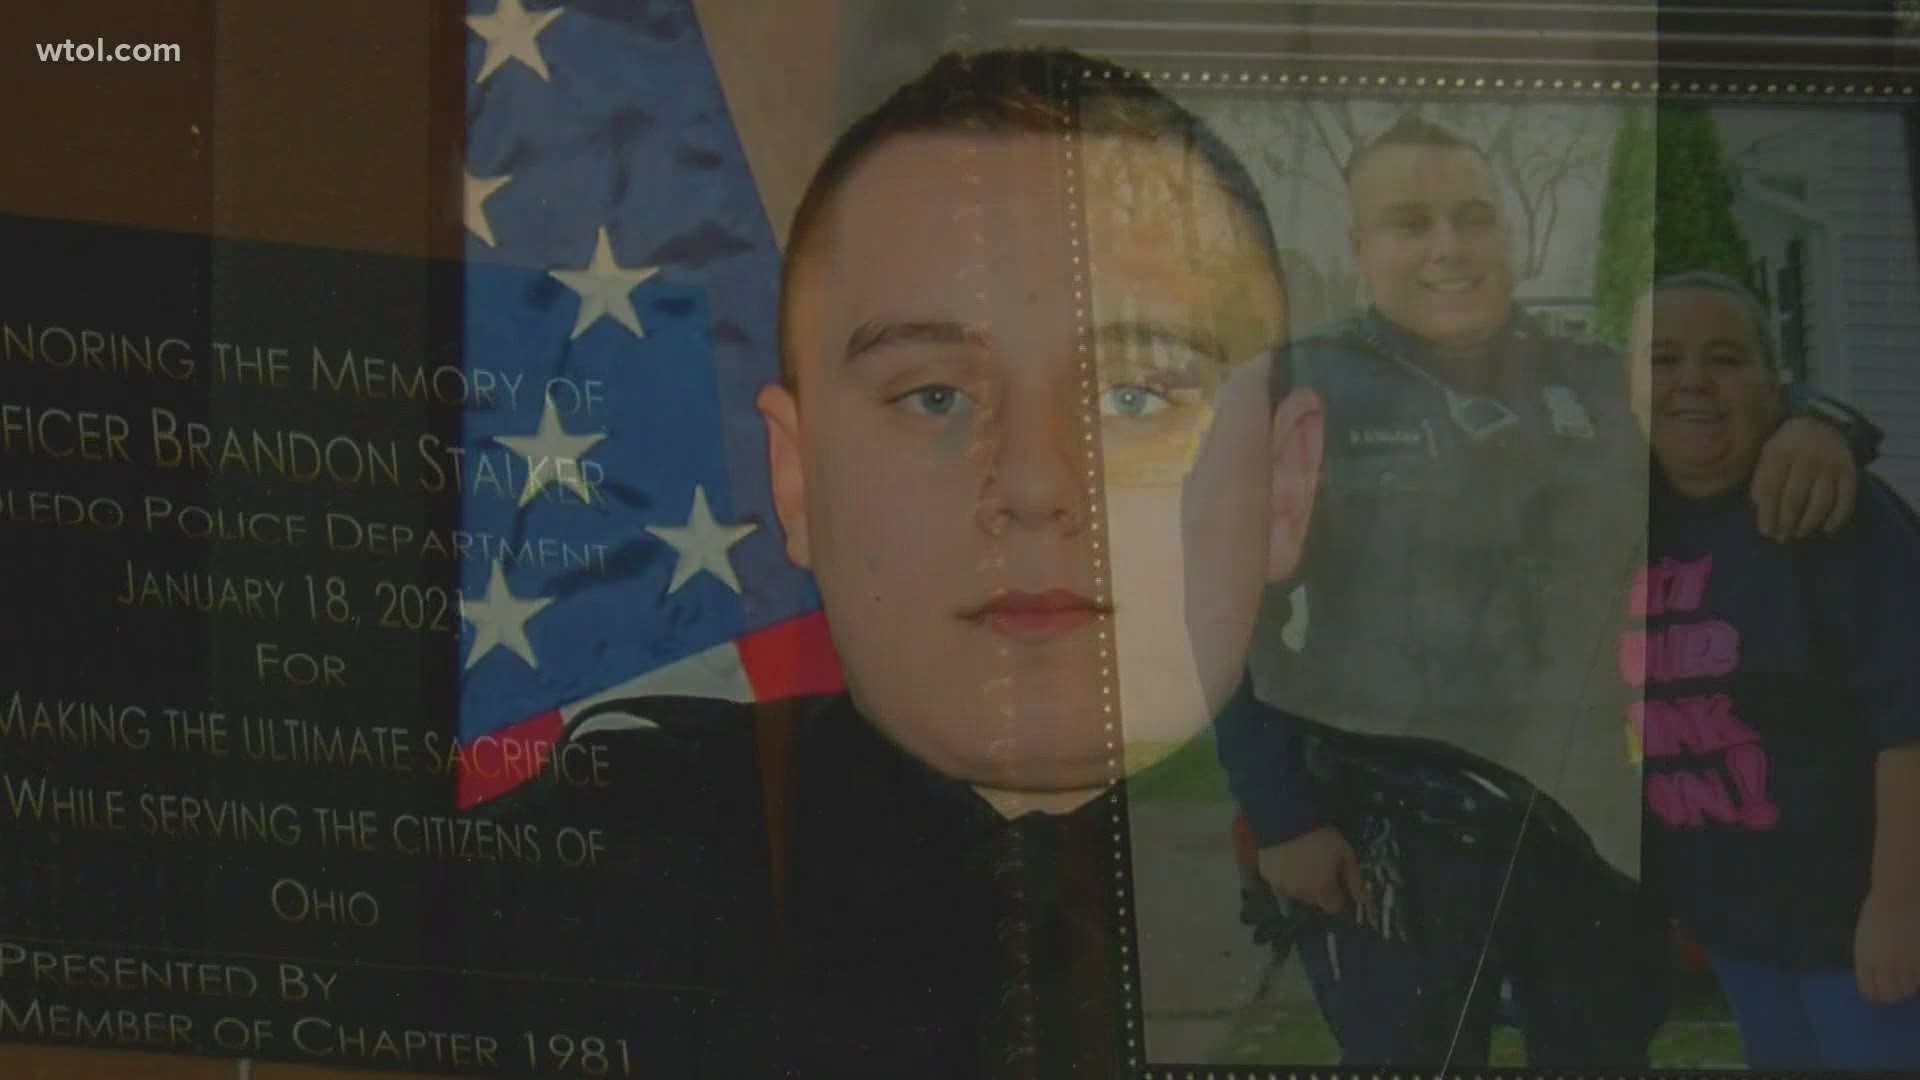 The mother of fallen Toledo Police Officer Brandon Stalker is opening up about his death for the first time.